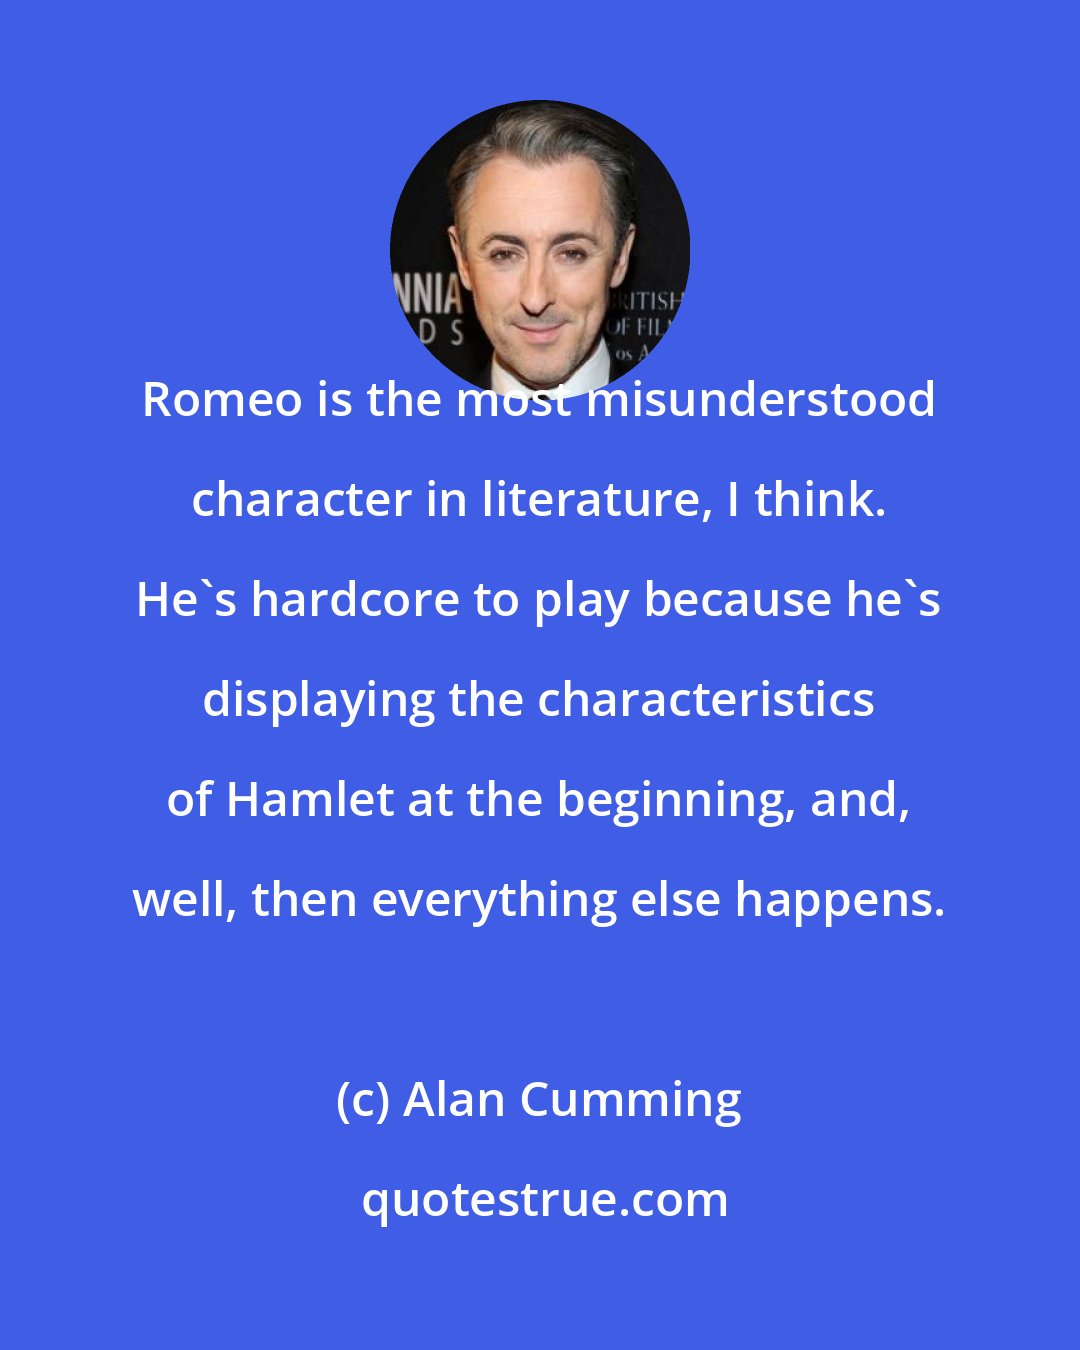 Alan Cumming: Romeo is the most misunderstood character in literature, I think. He's hardcore to play because he's displaying the characteristics of Hamlet at the beginning, and, well, then everything else happens.